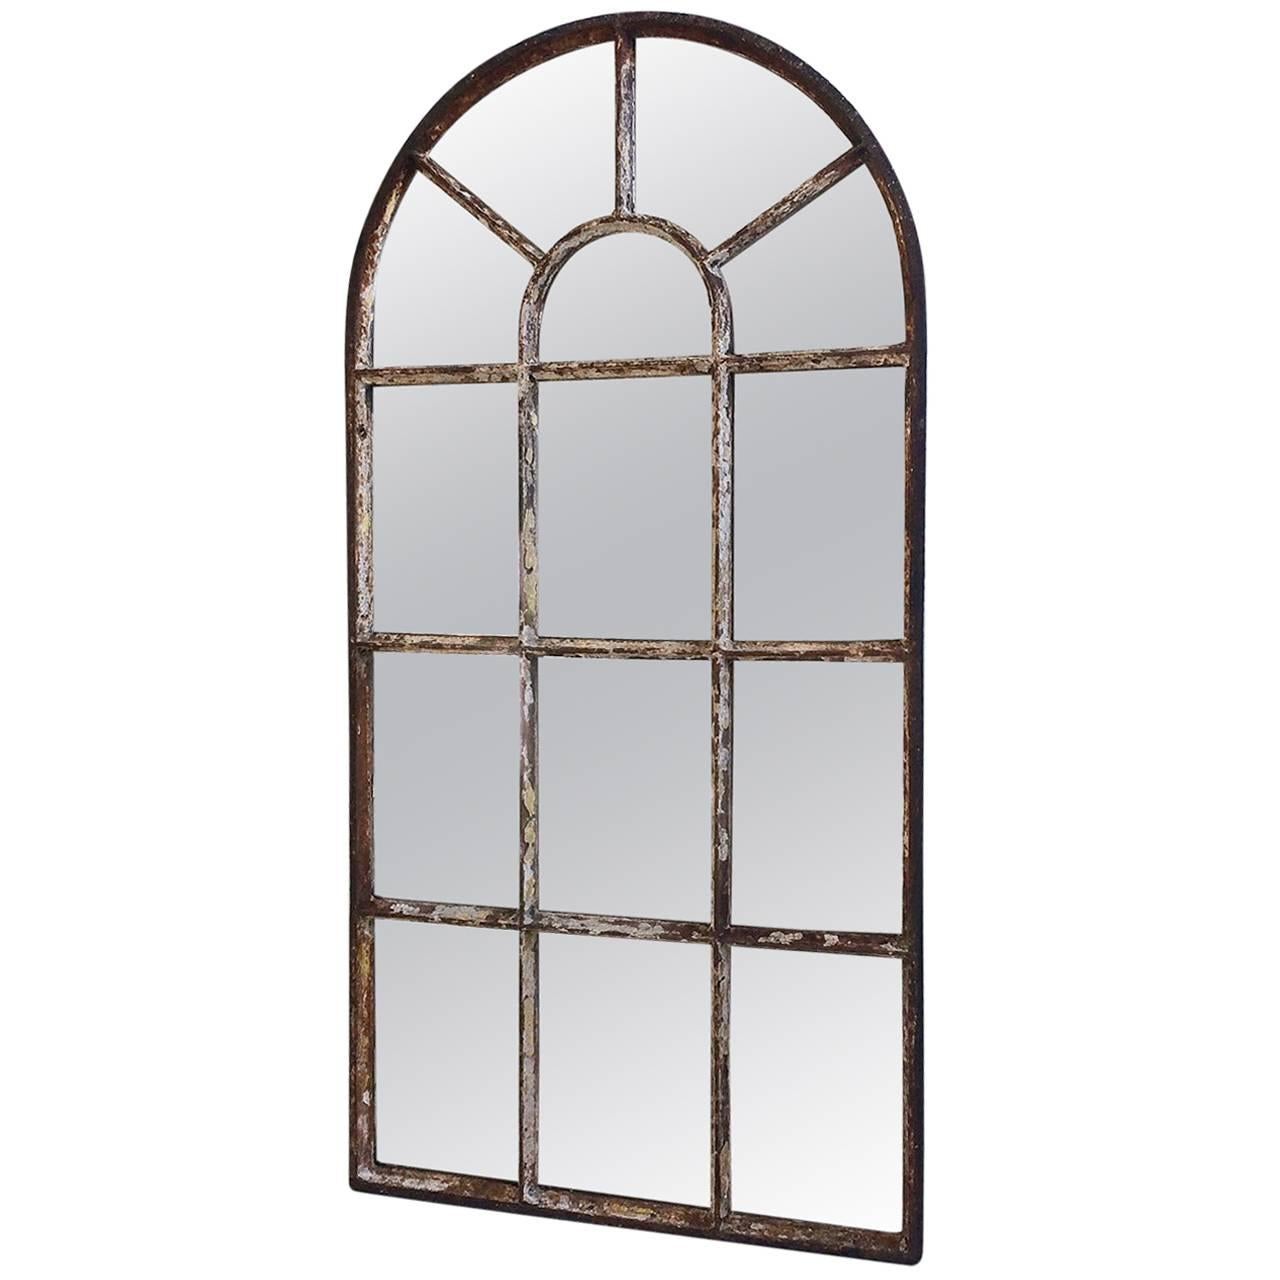 Antique Victorian Industrial Arched Top Cast Iron Window Mirror For Sale